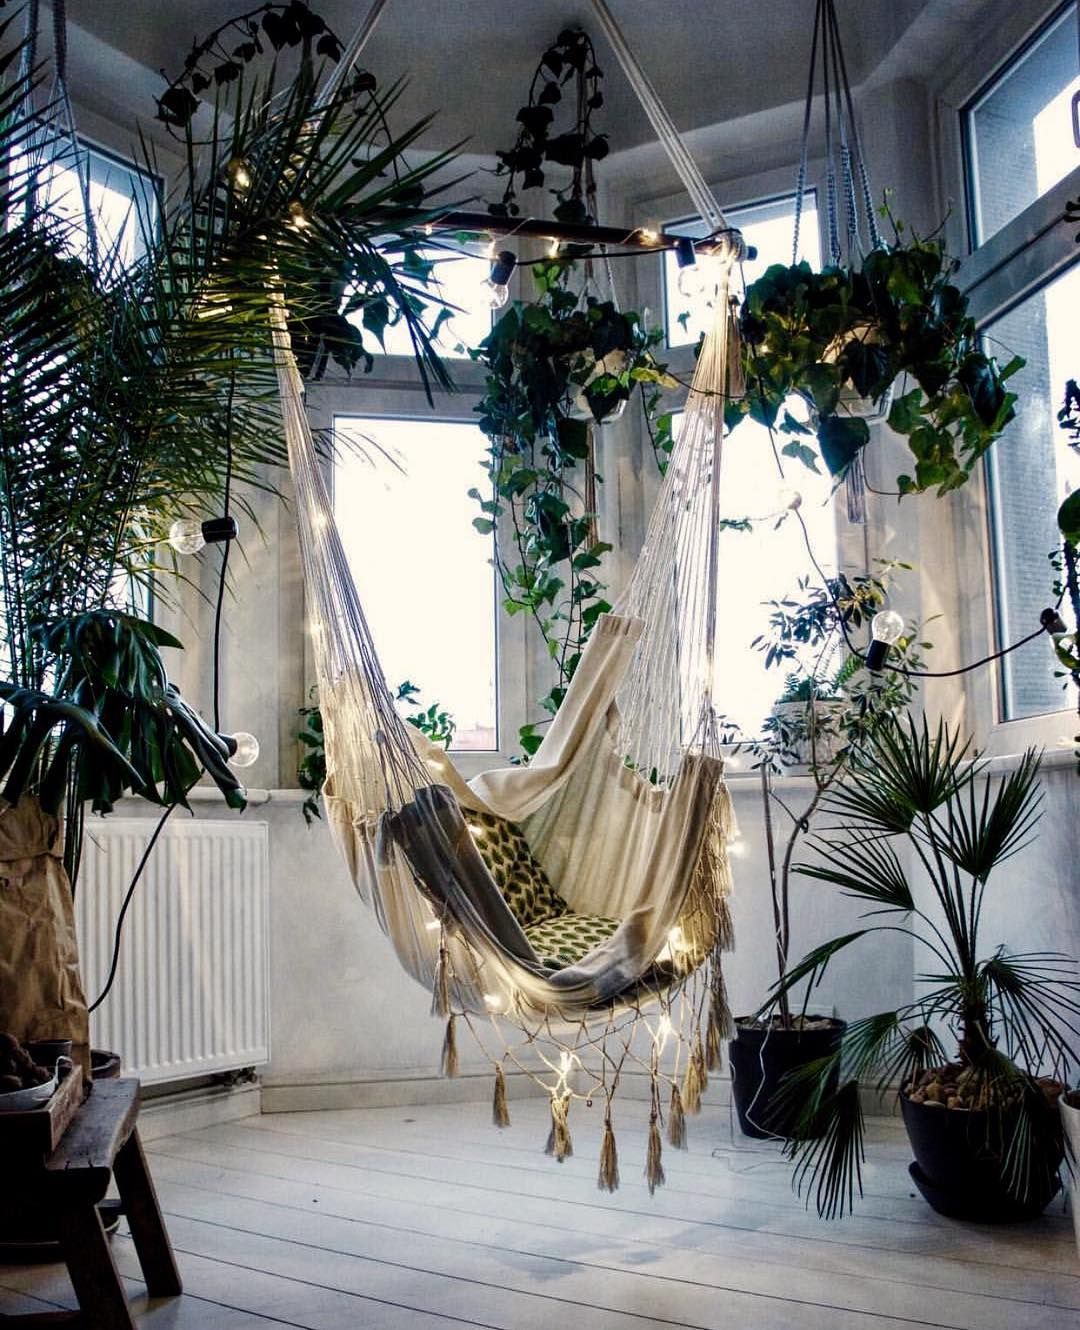 Converting simple rooms to modern bohemian bedroom styles -   11 room decor Plants free people ideas